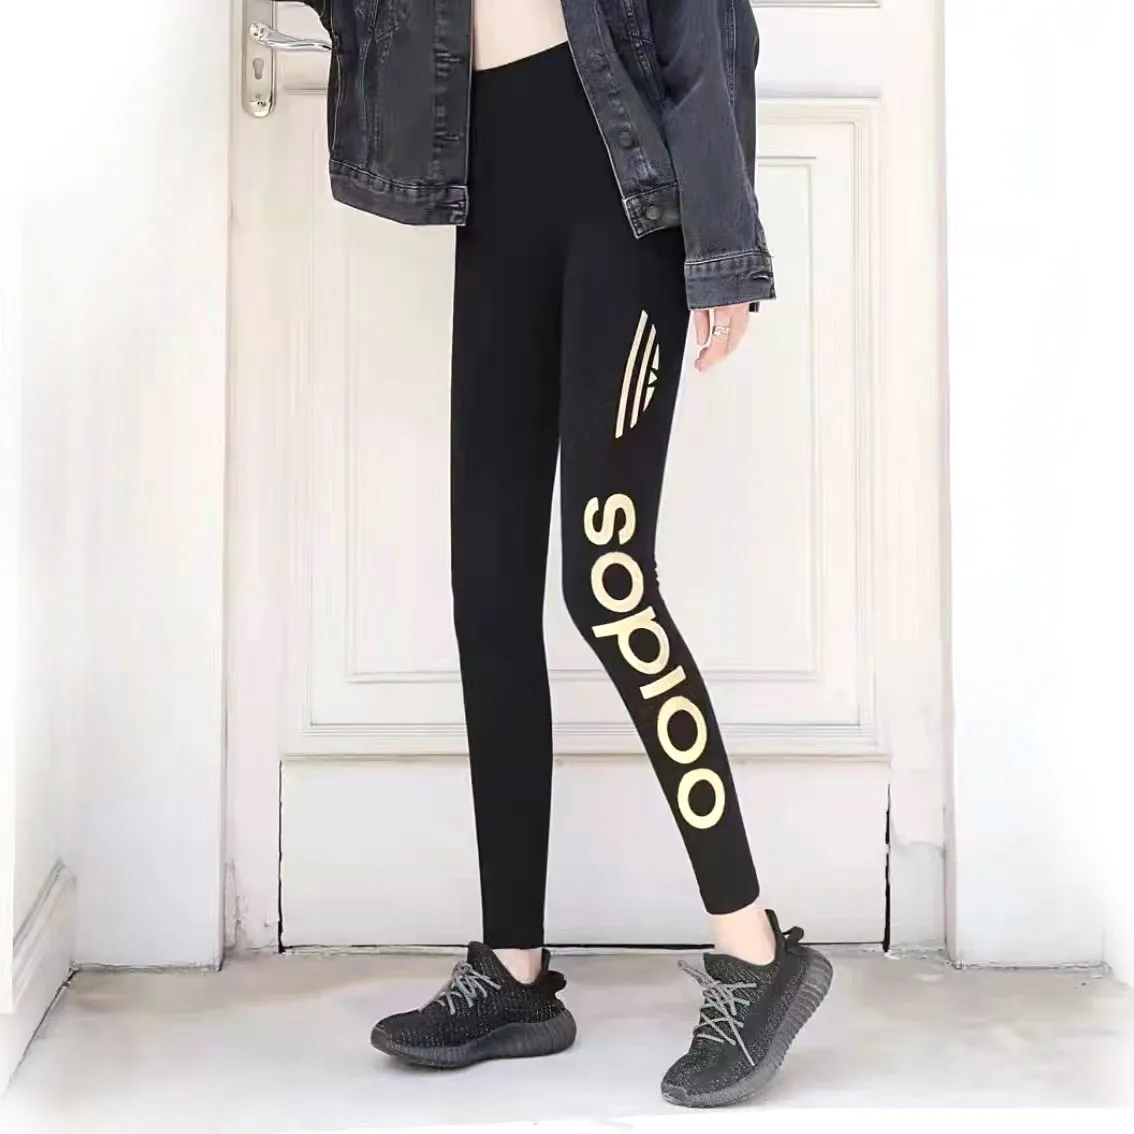 2023 Womens Quick Dry Black Yoga Shosho Leggings Stretchy Cropped Outfits  For Exercise, Running, Gym And Sports From Nmy2023, $12.07